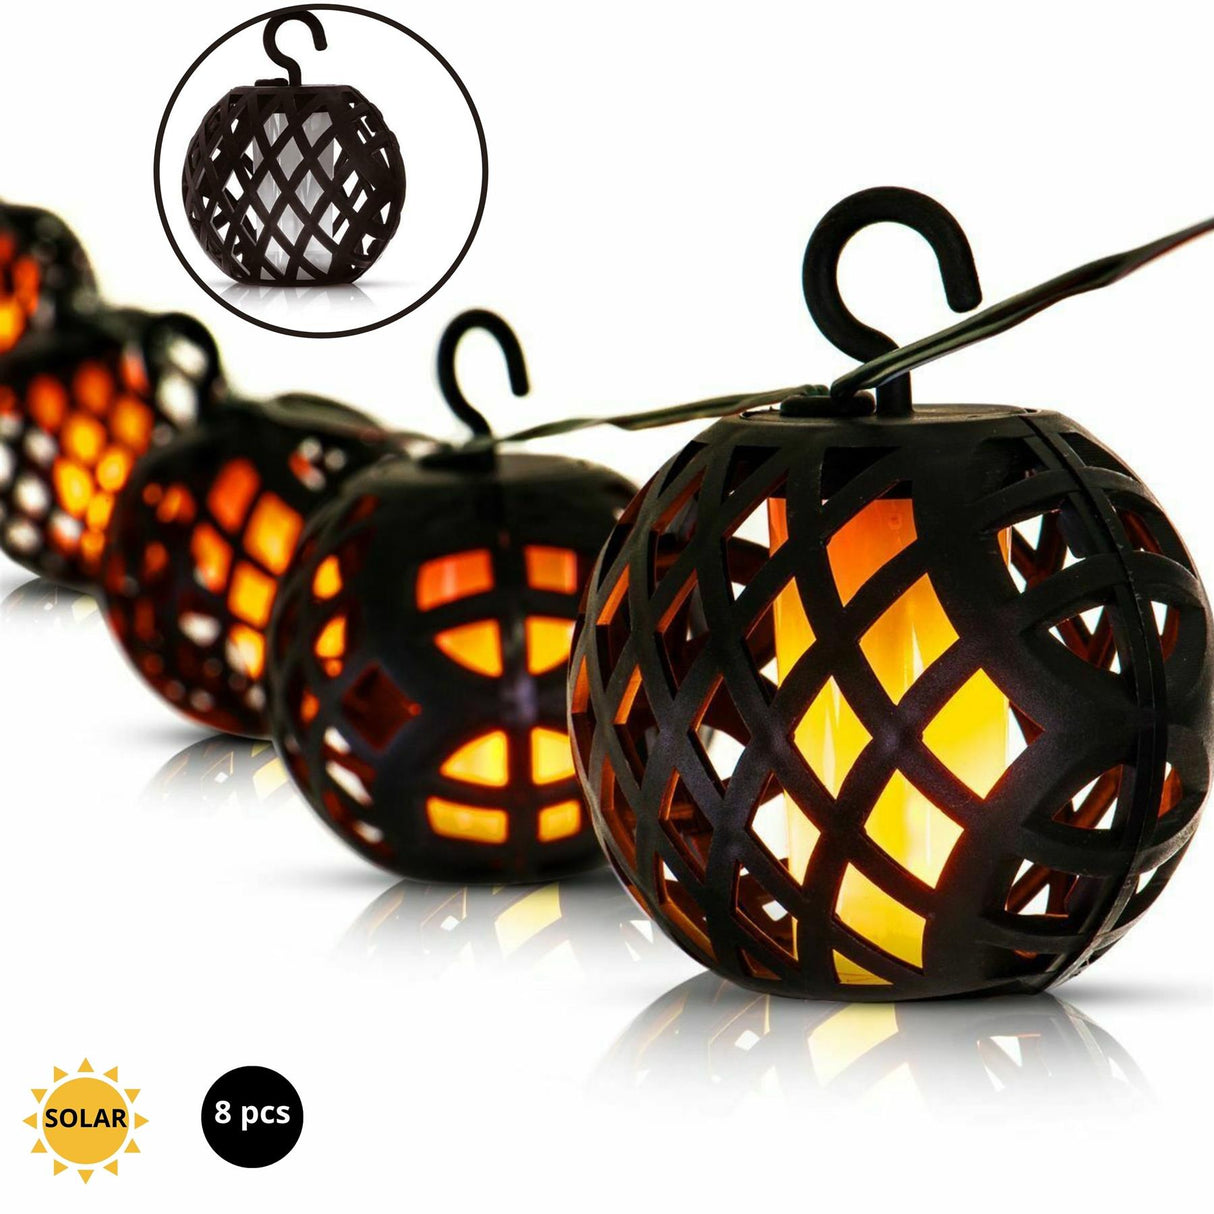 Solar LED Rattan Ball Flame Effect String Light by Geezy - UKBuyZone